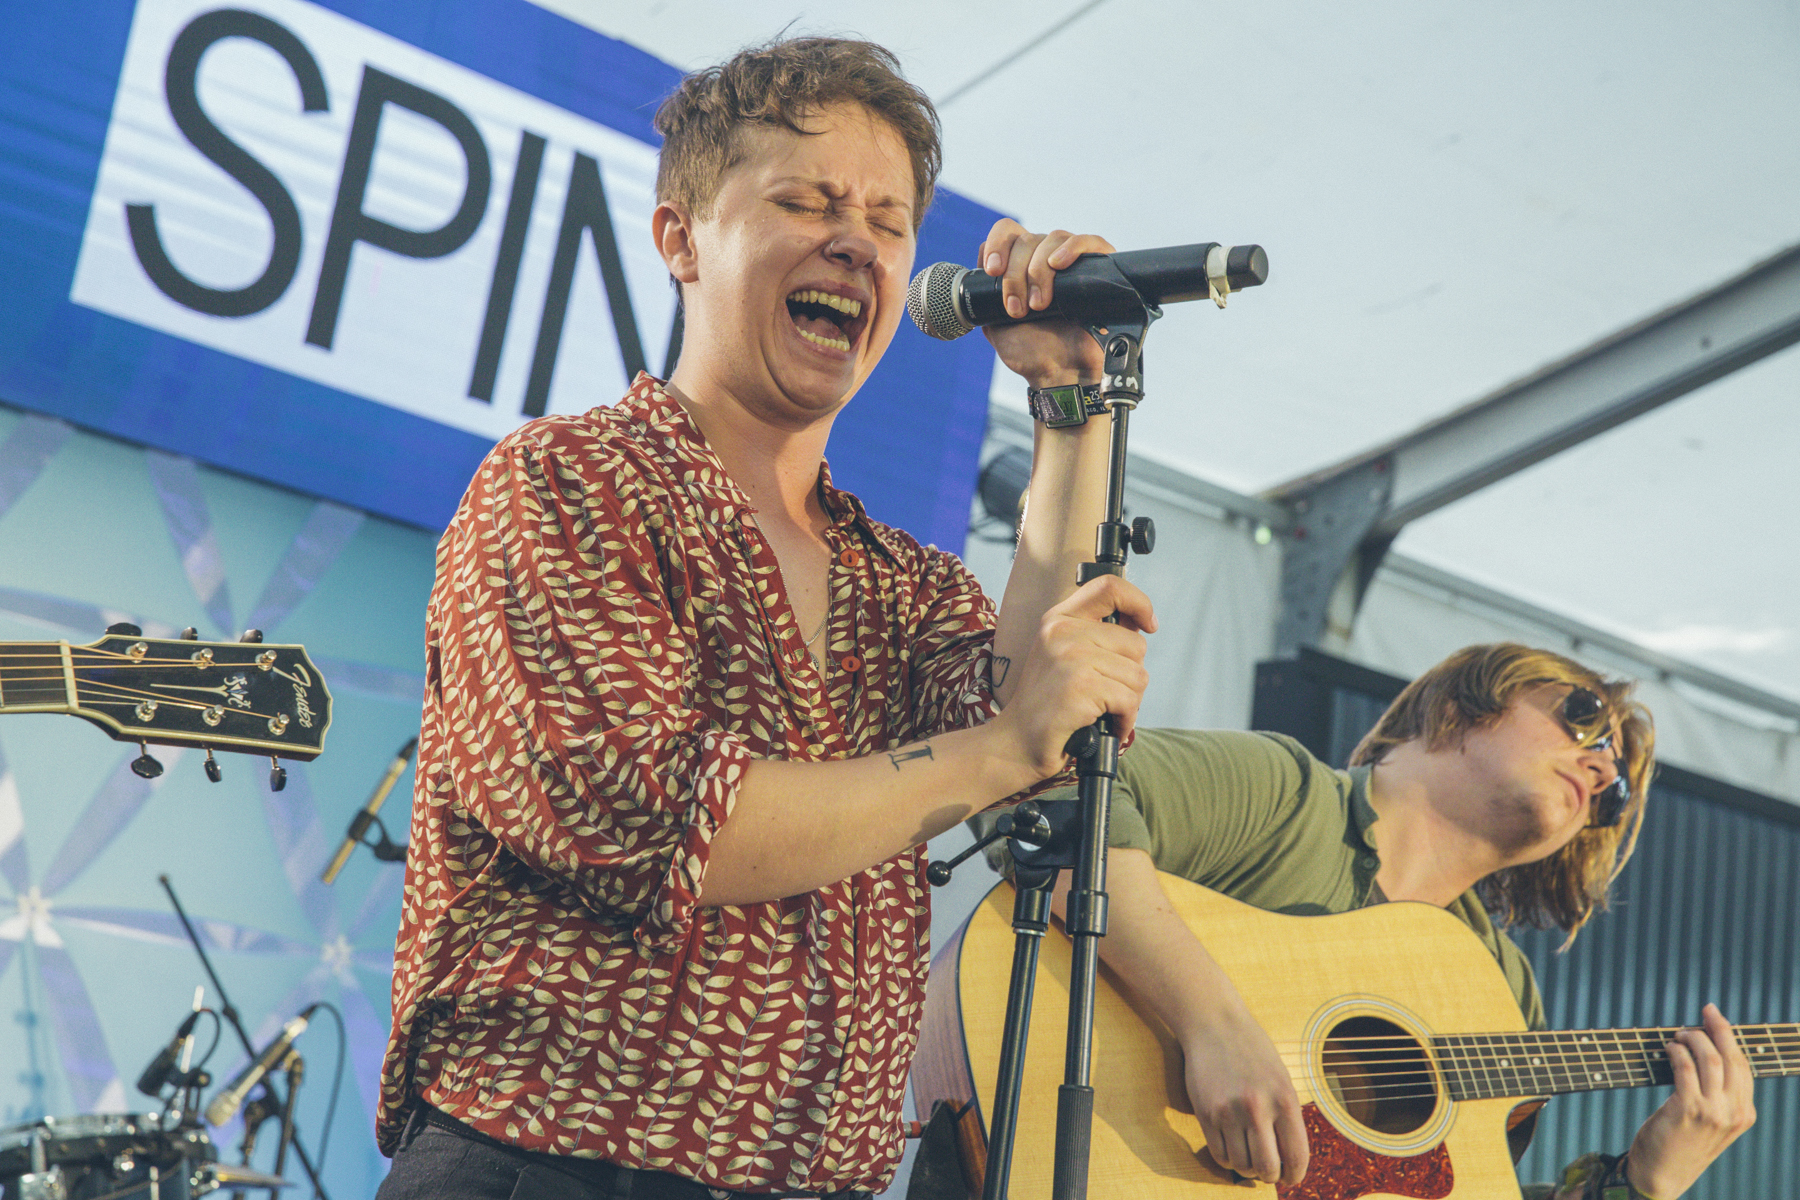 SPIN at Lollapalooza 2016: Day 3 at Toyota Music Den with the Front Bottoms, the Joy Formidable, and More